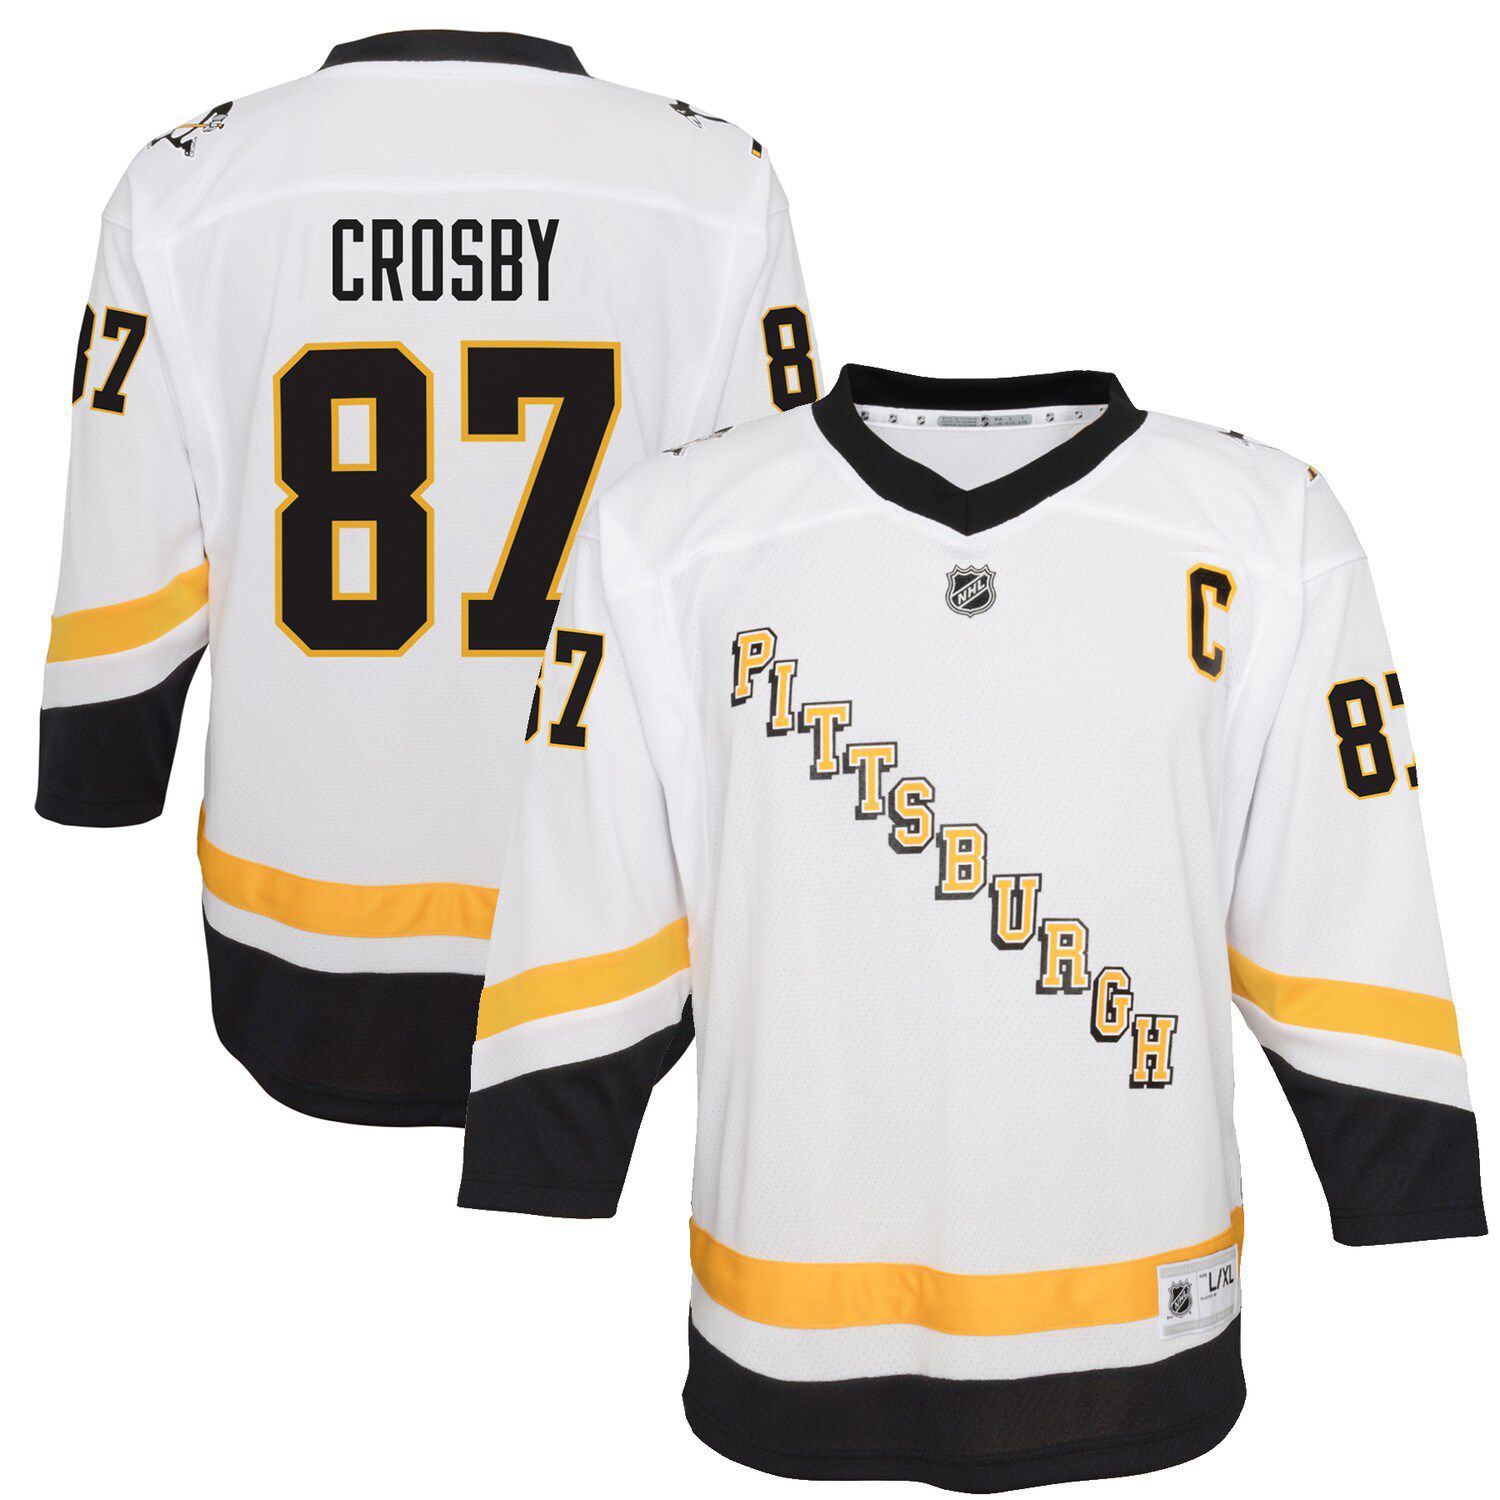 pittsburgh penguins youth jersey